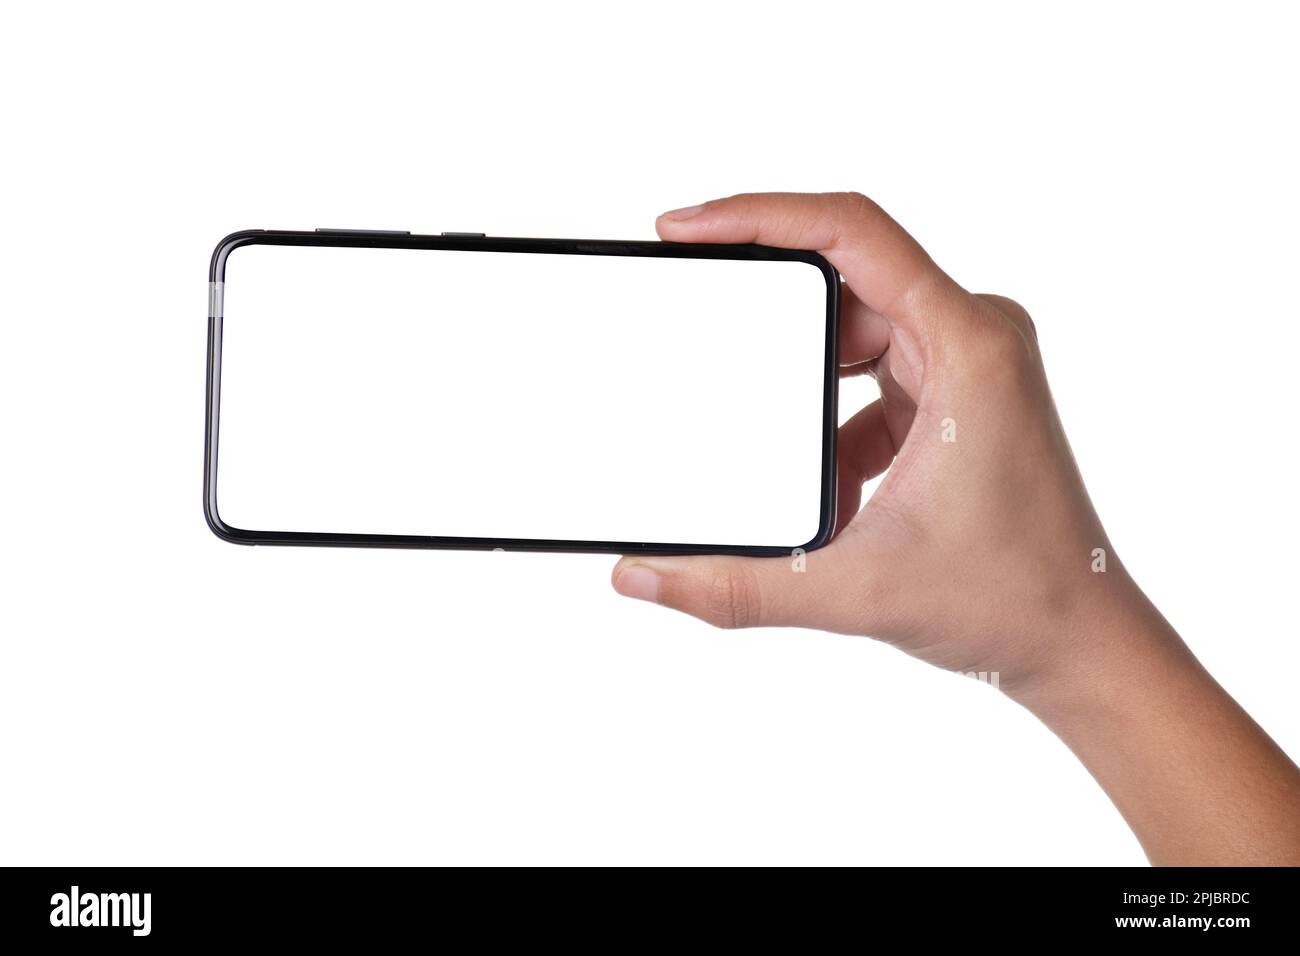 Horizontal hold blank screen smartphone in hand isolated on white background with clipping path Stock Photo